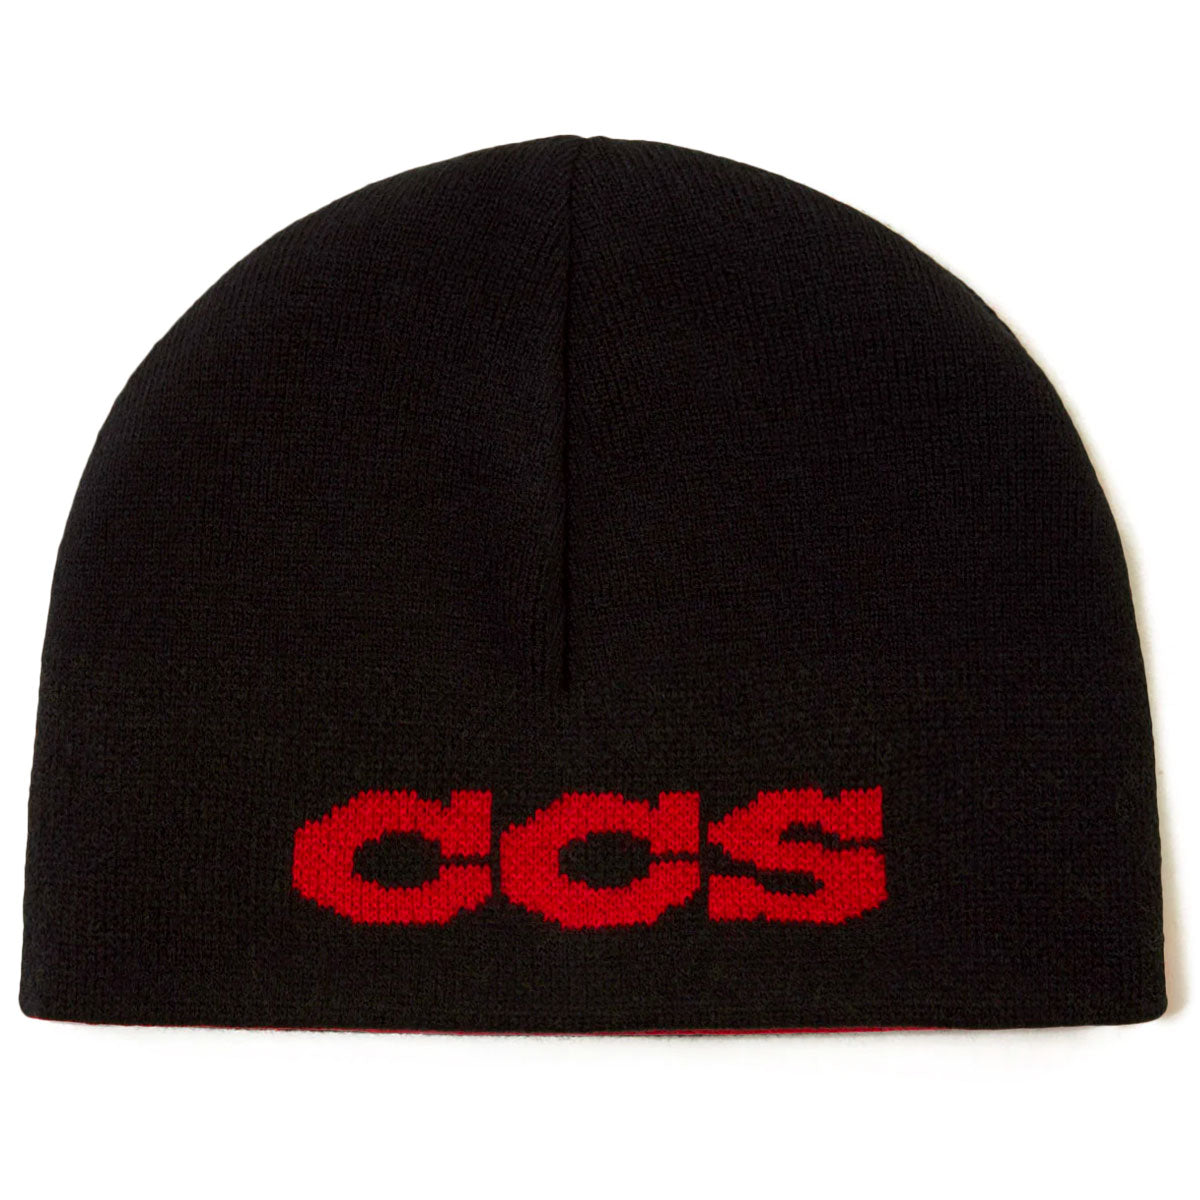 CCS Flames Reversible Skully Beanie - Black/Red image 3